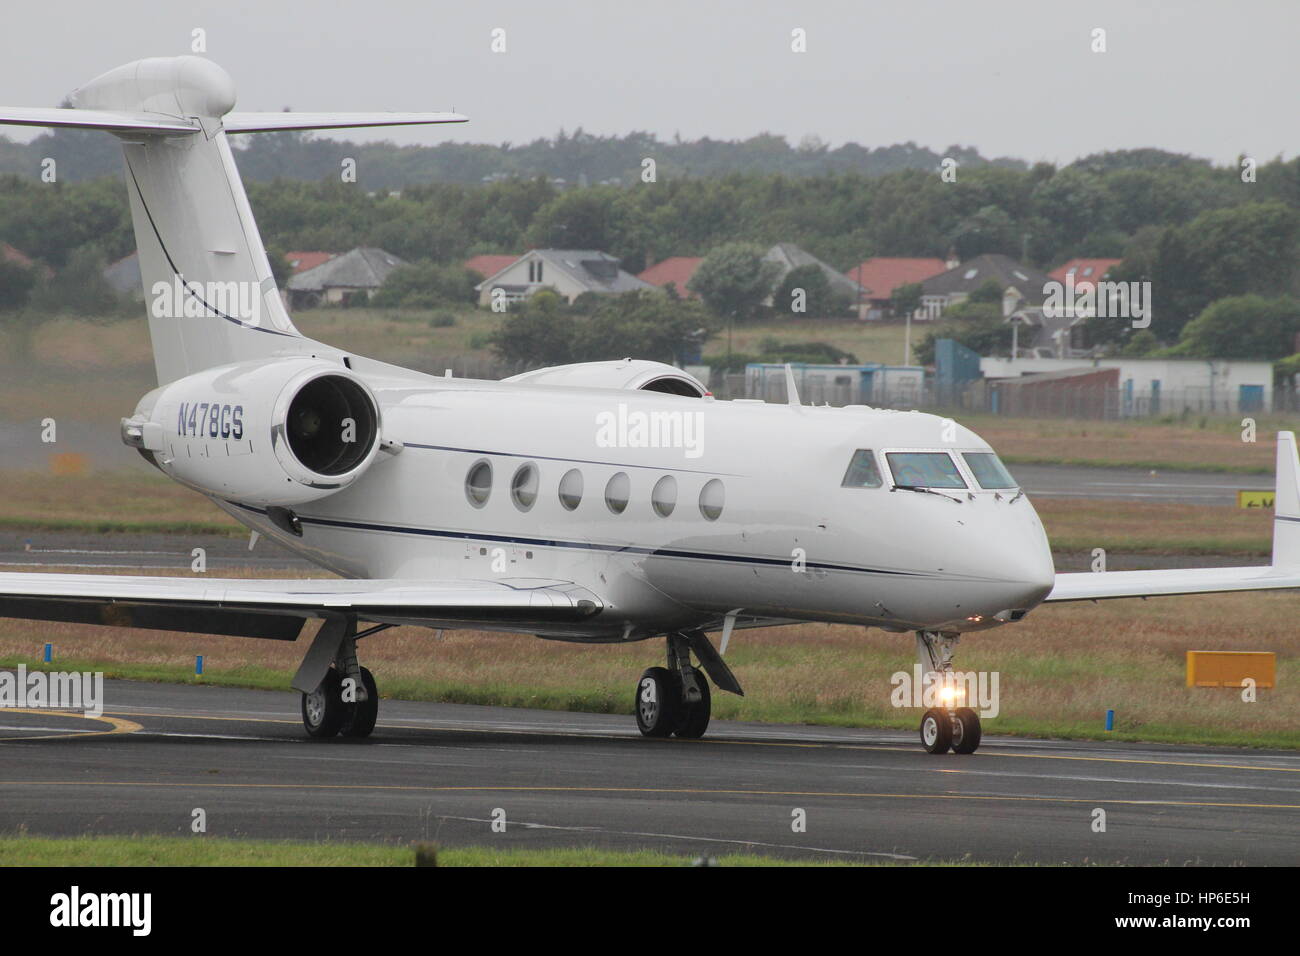 N478GS, a Gulfstream Aerospace G-IV, at Prestwick Airport in Ayrshire. It is thought that this aircraft was used in torture and rendition flights. Stock Photo